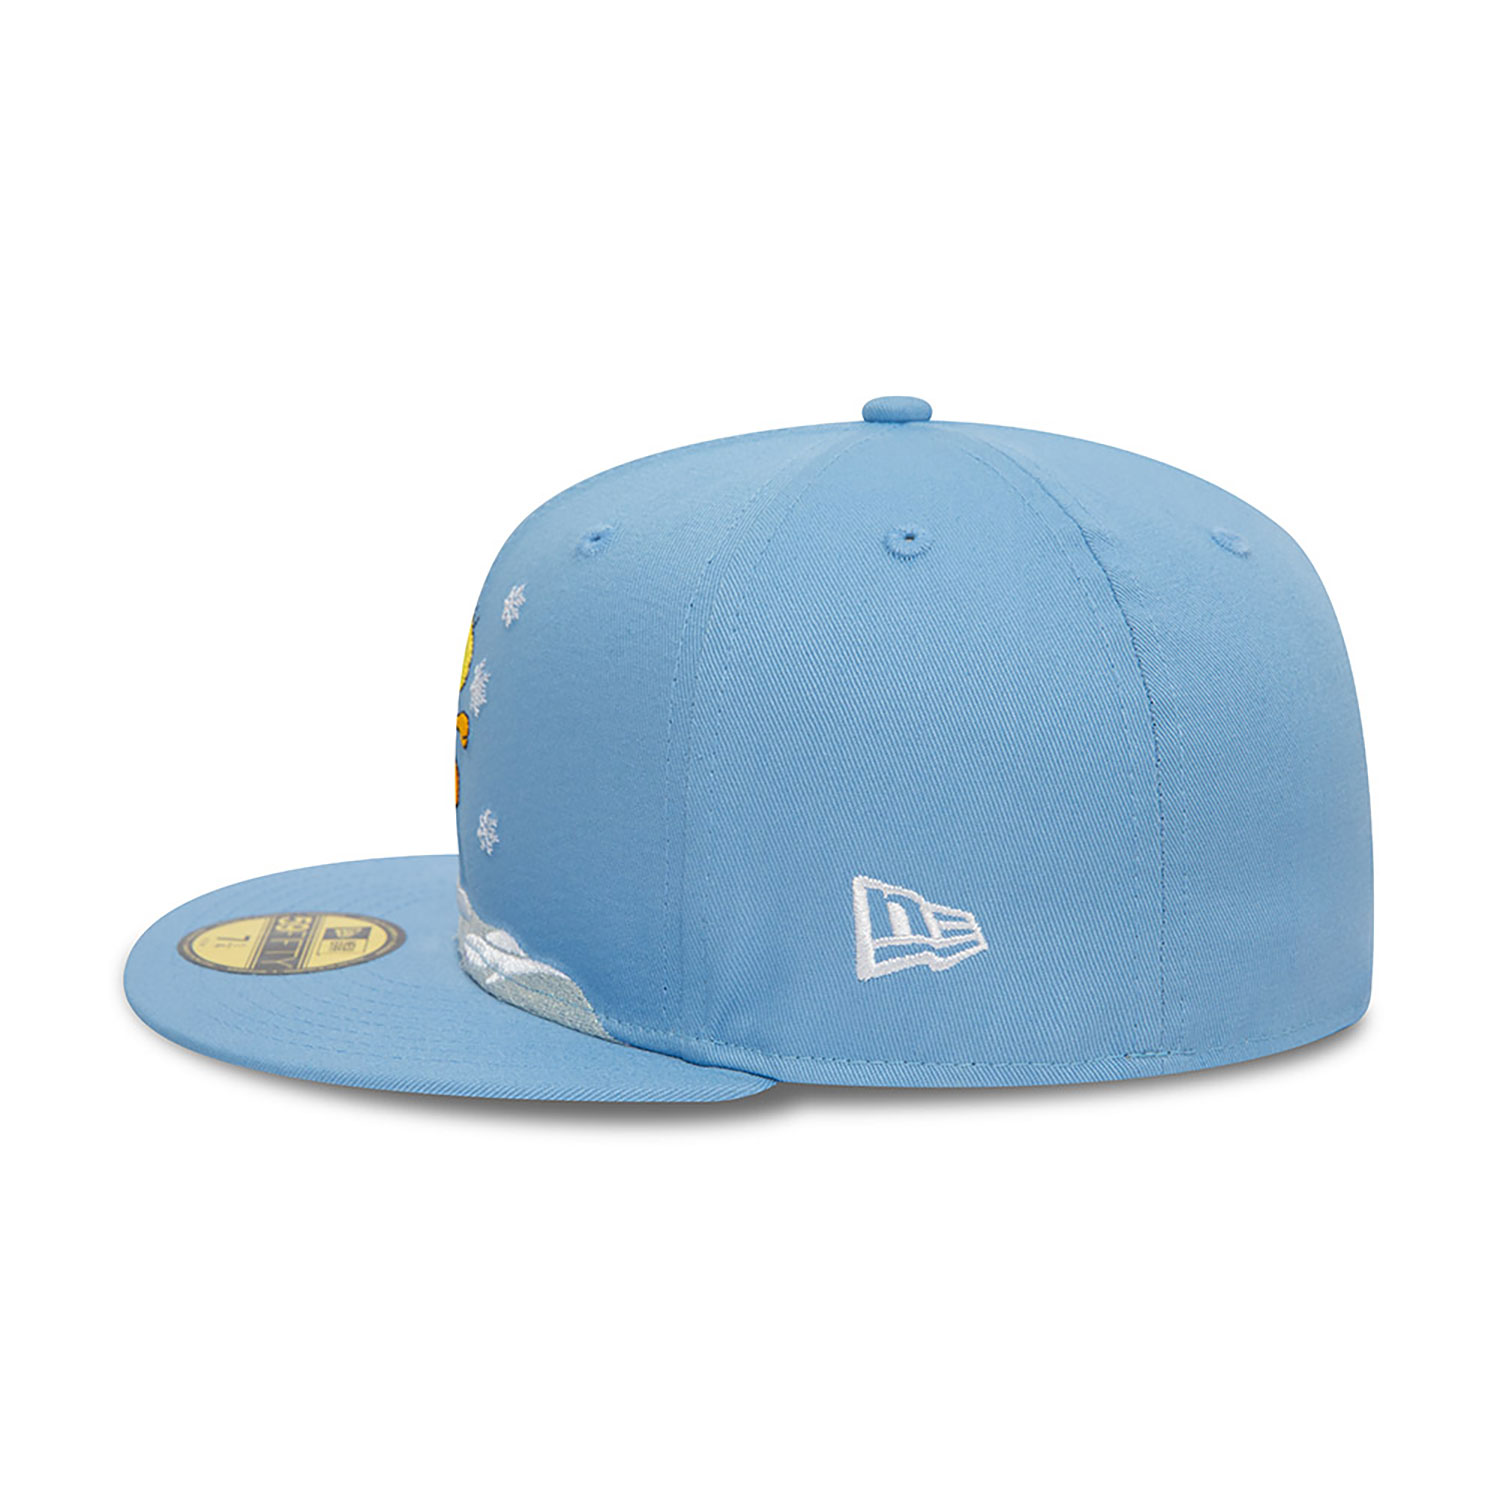 Tweety Pie Warner Brothers Festive Pastel Blue 59FIFTY Fitted Cap